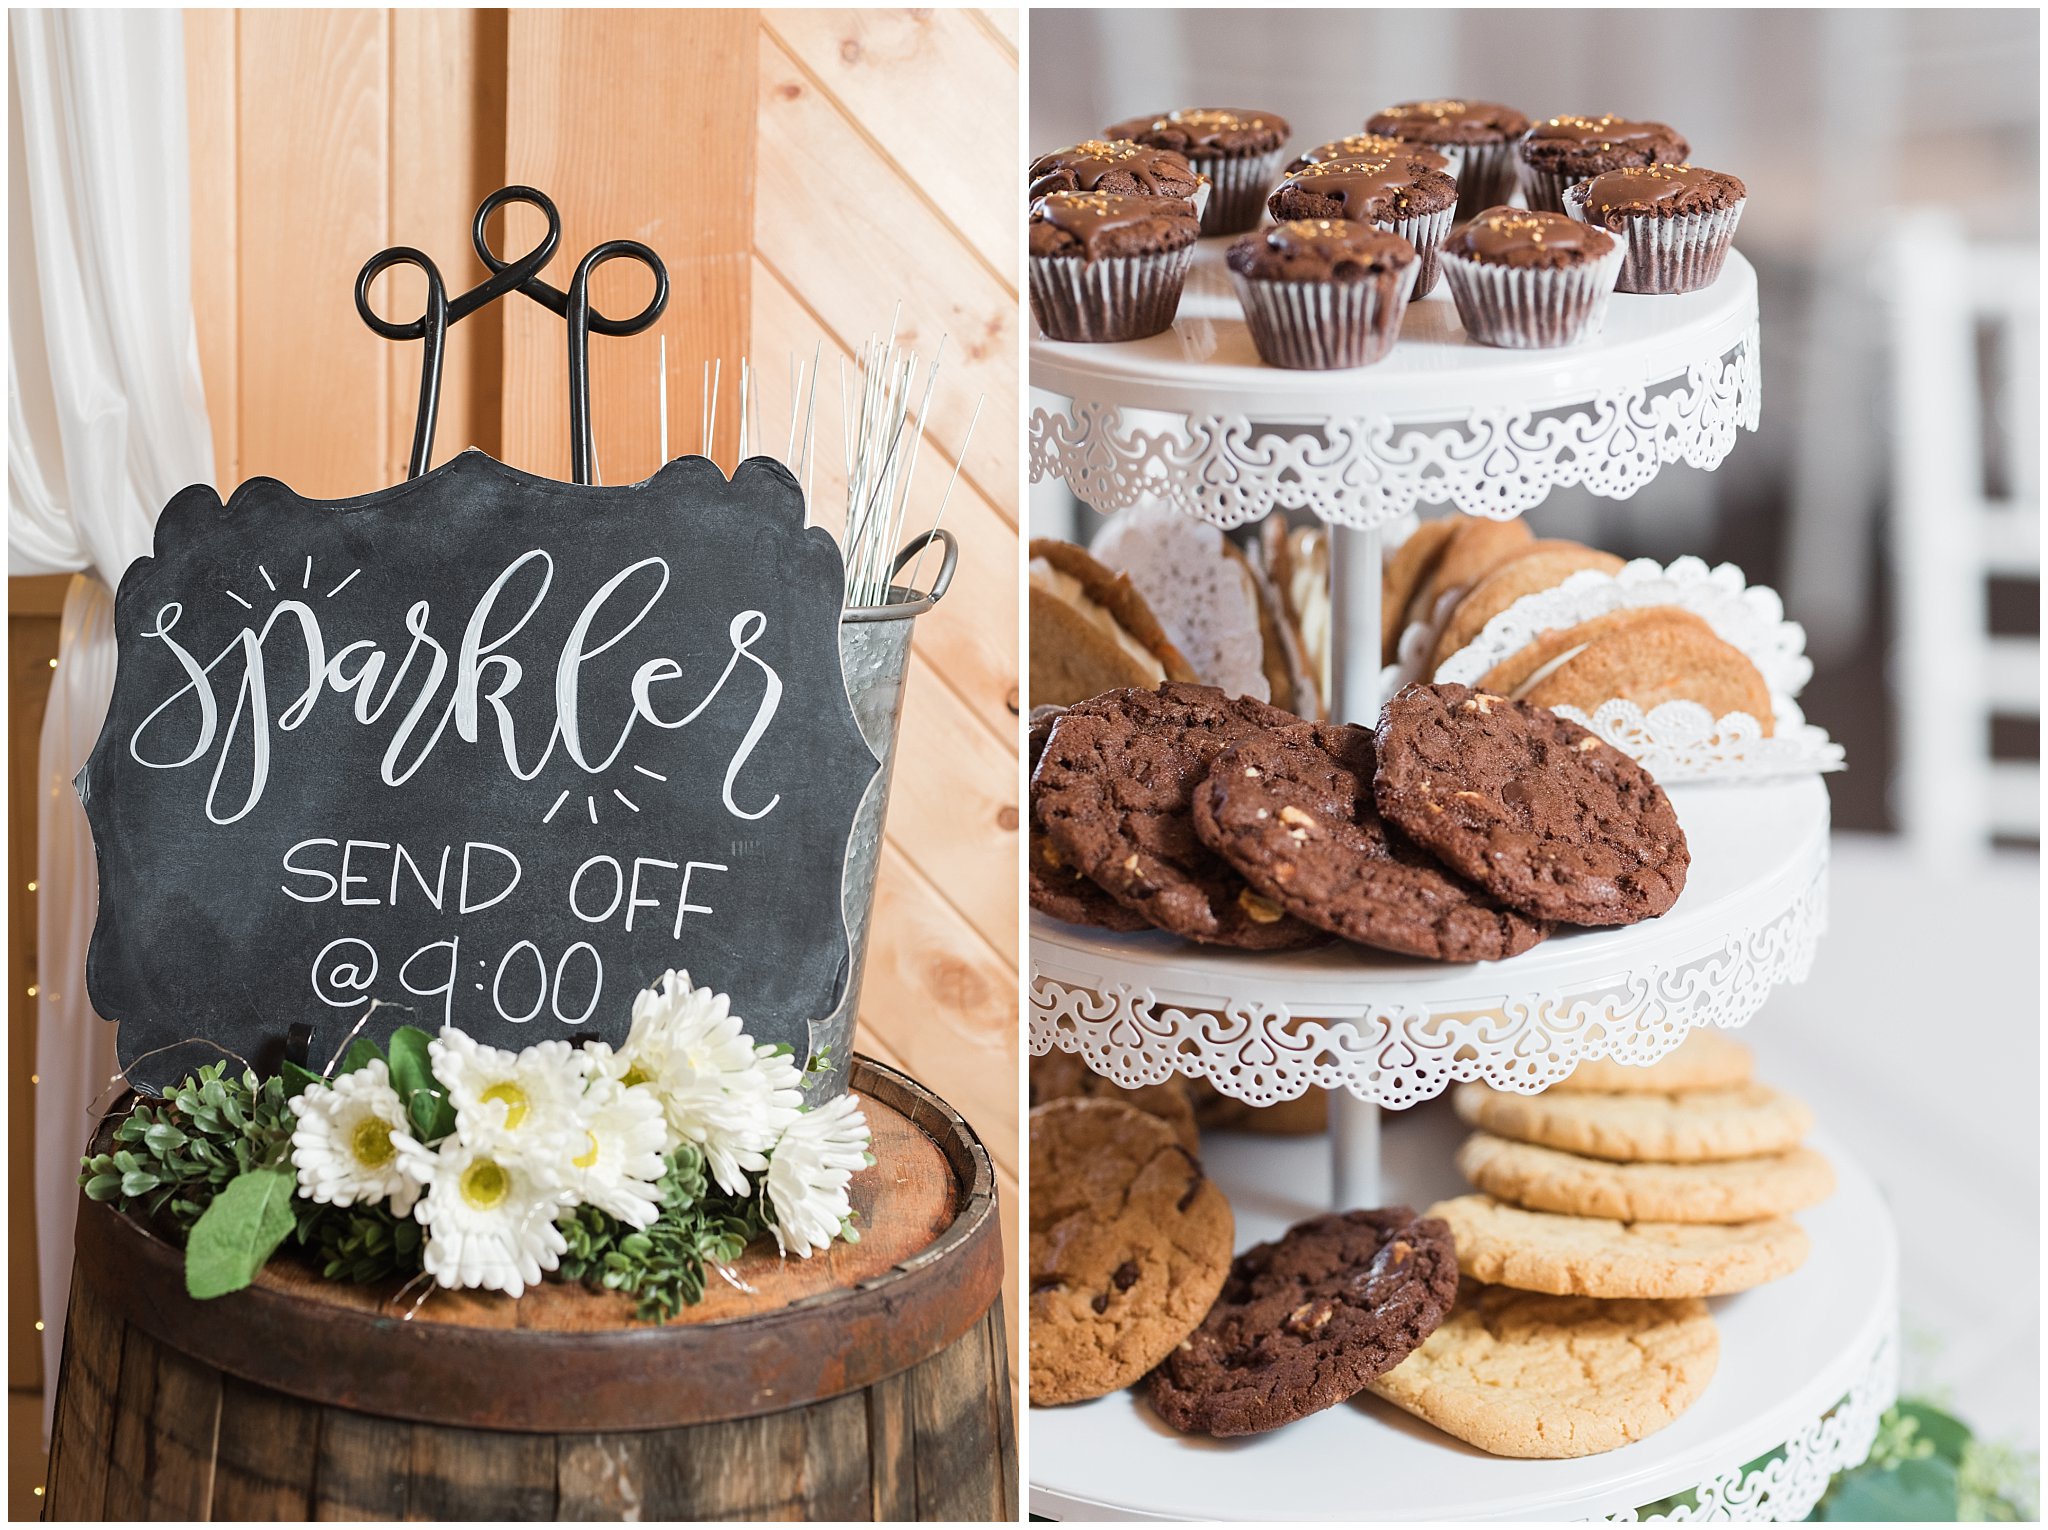 Barn reception with white linens and chairs and cookie centerpieces | Sage Green and Gray Summer Wedding at Oak Hills | Jessie and Dallin Photography